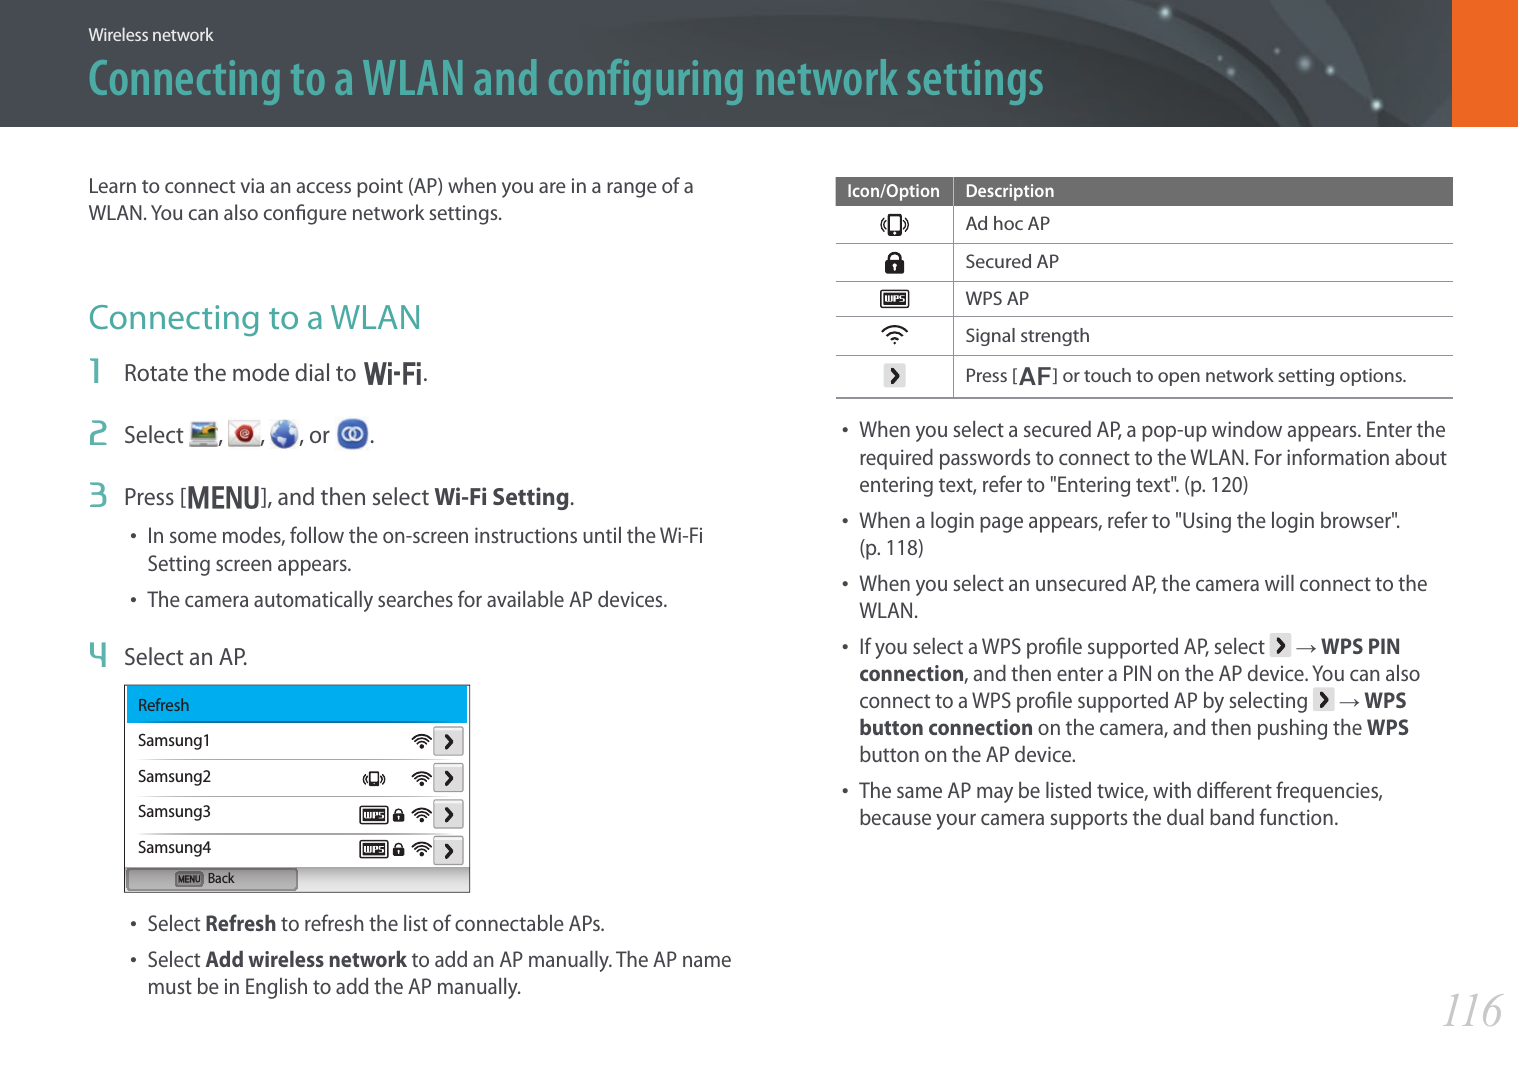 116Wireless networkConnecting to a WLAN and configuring network settingsLearn to connect via an access point (AP) when you are in a range of a WLAN. You can also congure network settings.Connecting to a WLAN1  Rotate the mode dial to B.2  Select  ,  , , or  .3  Press [m], and then select Wi-Fi Setting.• In some modes, follow the on-screen instructions until the Wi-Fi Setting screen appears.• The camera automatically searches for available AP devices.4  Select an AP.BackRefreshSamsung1Samsung2Samsung3Samsung4• Select Refresh to refresh the list of connectable APs.• Select Add wireless network to add an AP manually. The AP name must be in English to add the AP manually.Icon/Option DescriptionAd hoc APSecured APWPS APSignal strengthPress [F] or touch to open network setting options.• When you select a secured AP, a pop-up window appears. Enter the required passwords to connect to the WLAN. For information about entering text, refer to &quot;Entering text&quot;. (p. 120)• When a login page appears, refer to &quot;Using the login browser&quot;.  (p. 118)• When you select an unsecured AP, the camera will connect to the WLAN.• If you select a WPS prole supported AP, select   ĺ WPS PIN connection, and then enter a PIN on the AP device. You can also connect to a WPS prole supported AP by selecting   ĺ WPS button connection on the camera, and then pushing the WPS button on the AP device.• The same AP may be listed twice, with dierent frequencies, because your camera supports the dual band function.